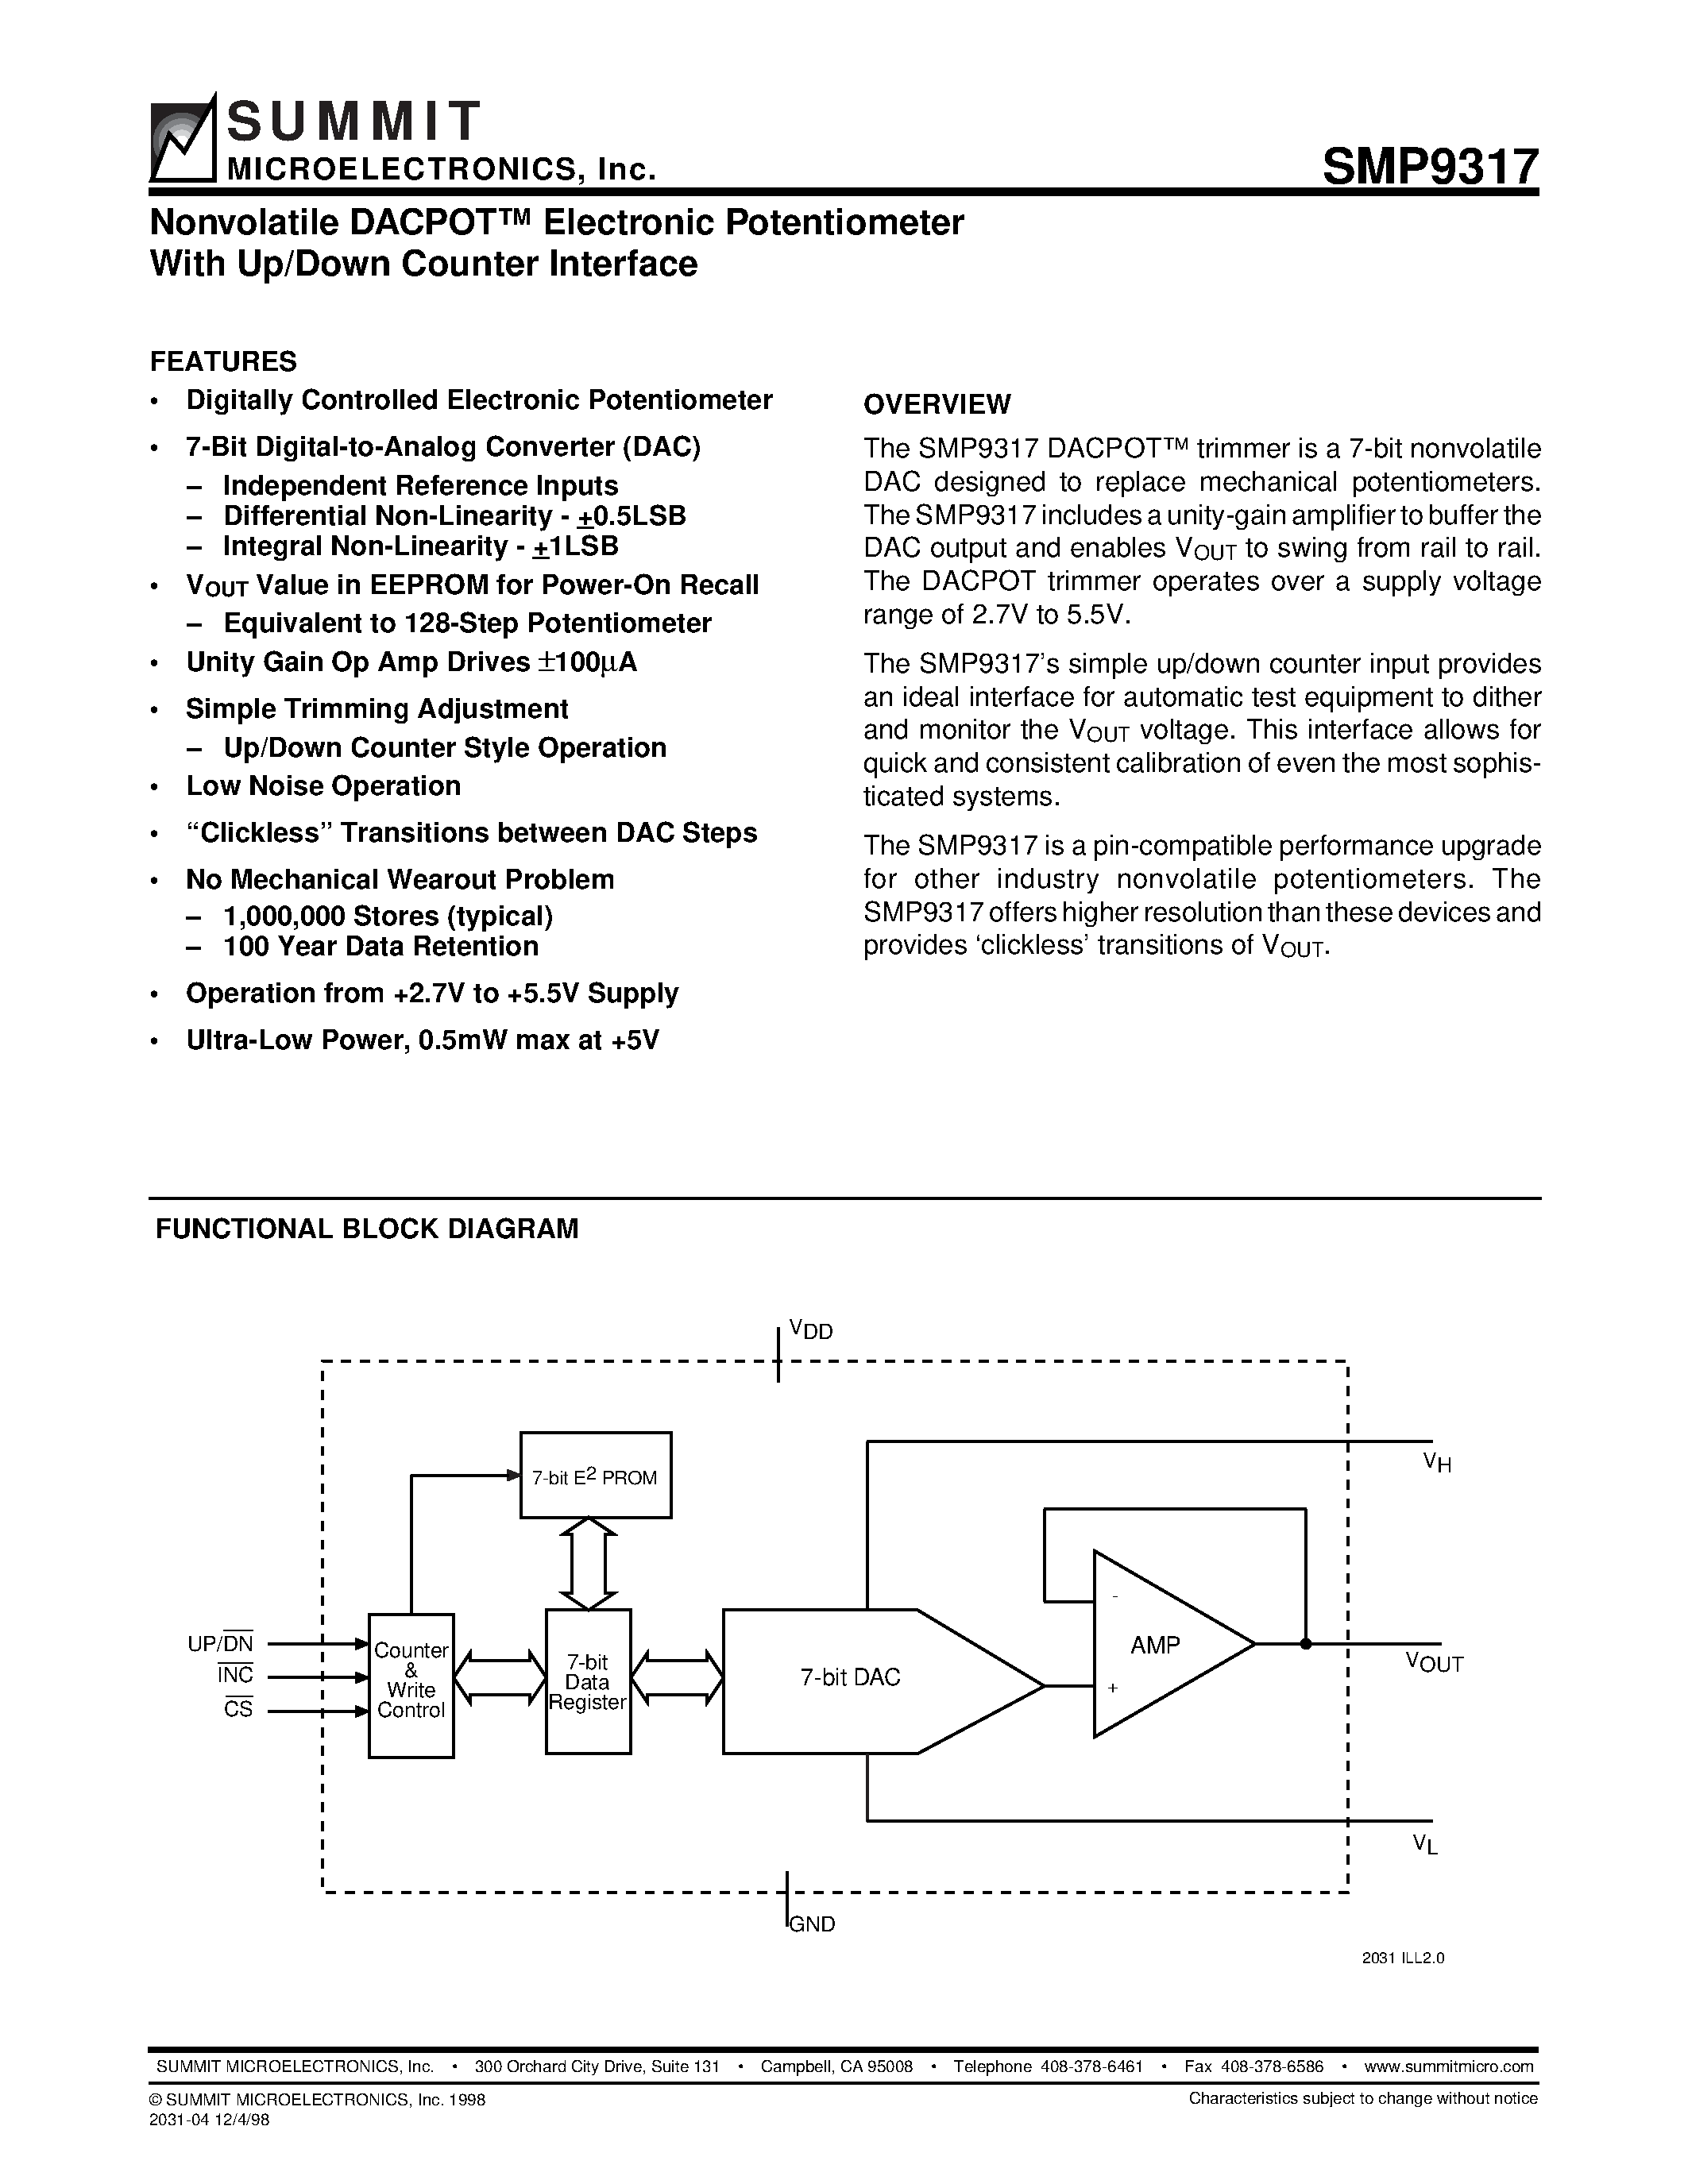 Datasheet SMP9317S - Nonvolatile DACPOT Electronic Potentiometer With Up/Down Counter Interface page 1